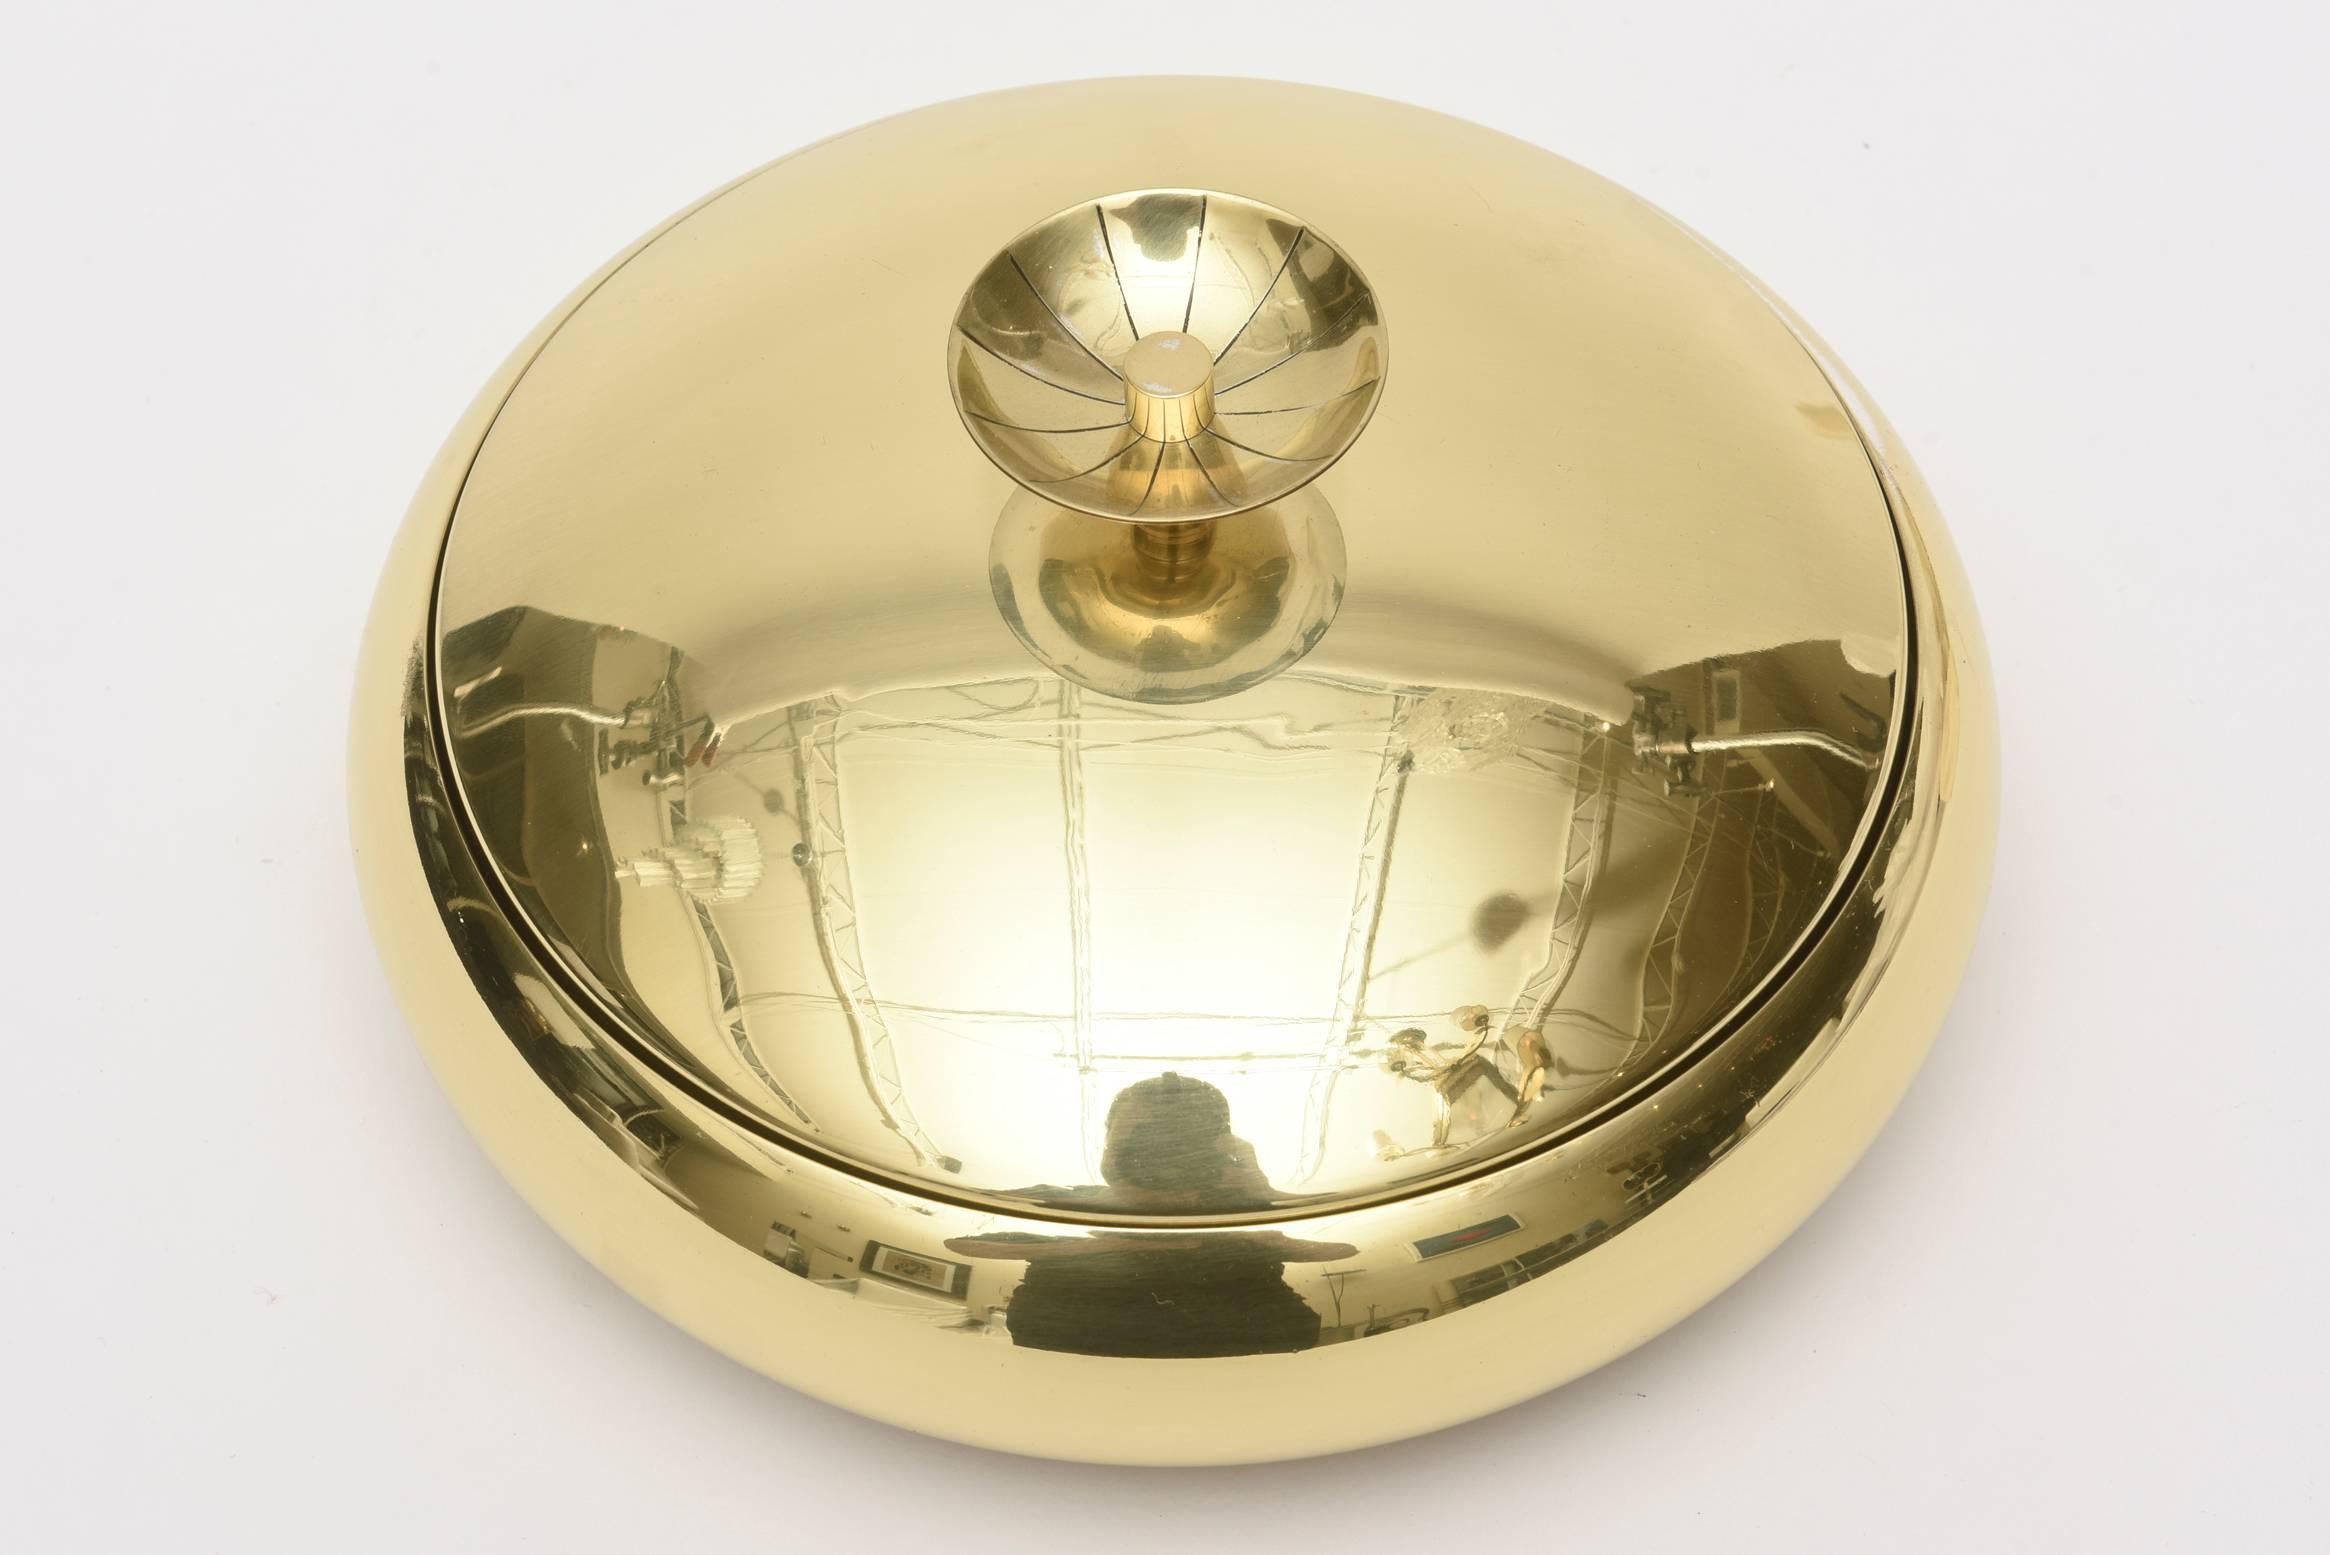 This hallmarked midcentury modern Tommi Parzinger polished and lacquered brass box or bowl is classic and timeless.
There is a glass insert from the time period for relish or pickles or olives. One can take that out and just use as a two-part chic